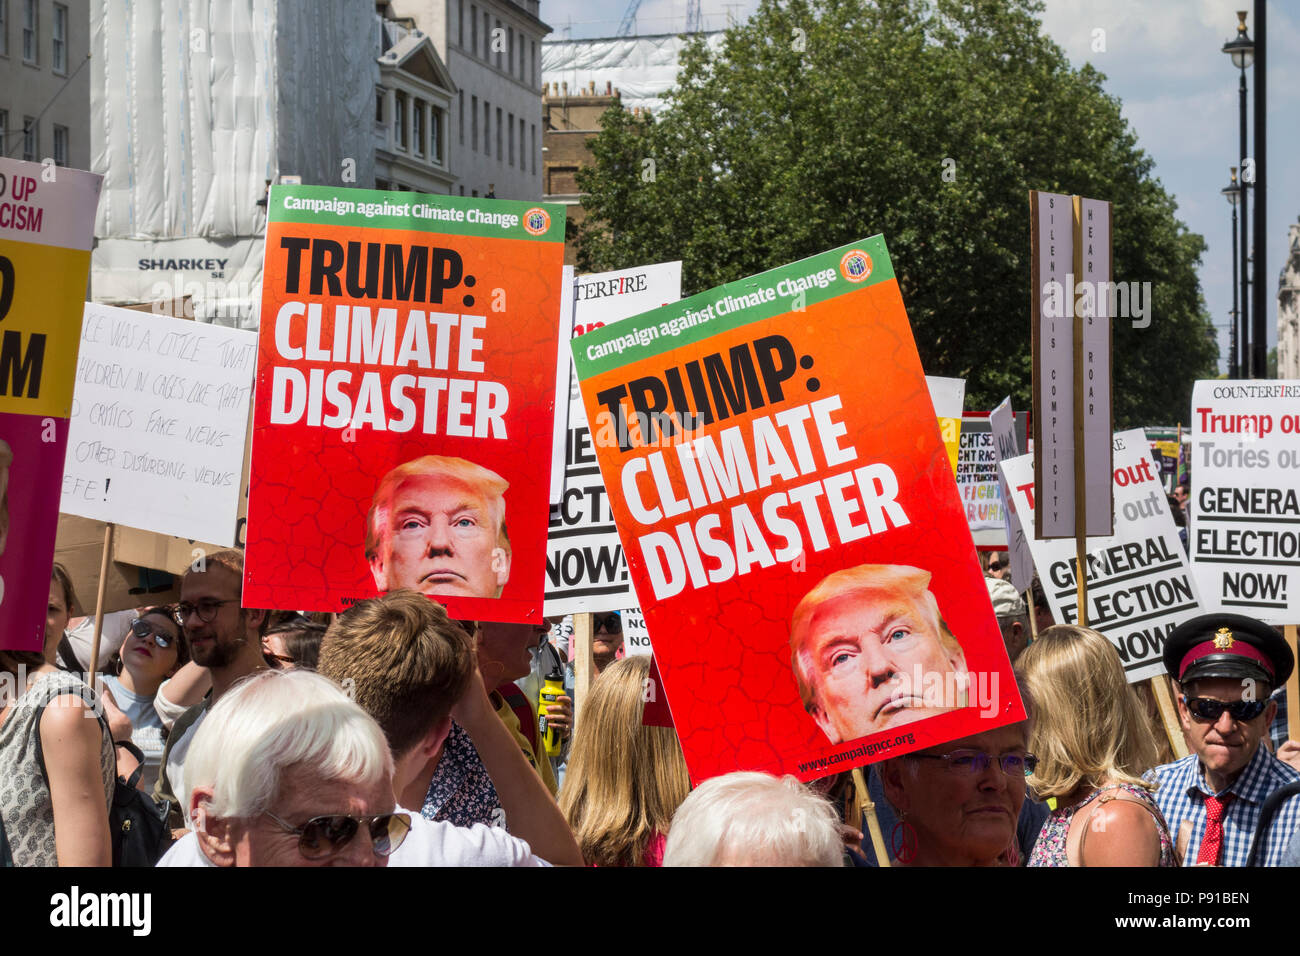 London, England, UK. 13 July, 2018.  Anti Trump climate change protestors in London marching against Donald Trump's visit to the UK © Benjamin John/ Alamy Live News. Stock Photo